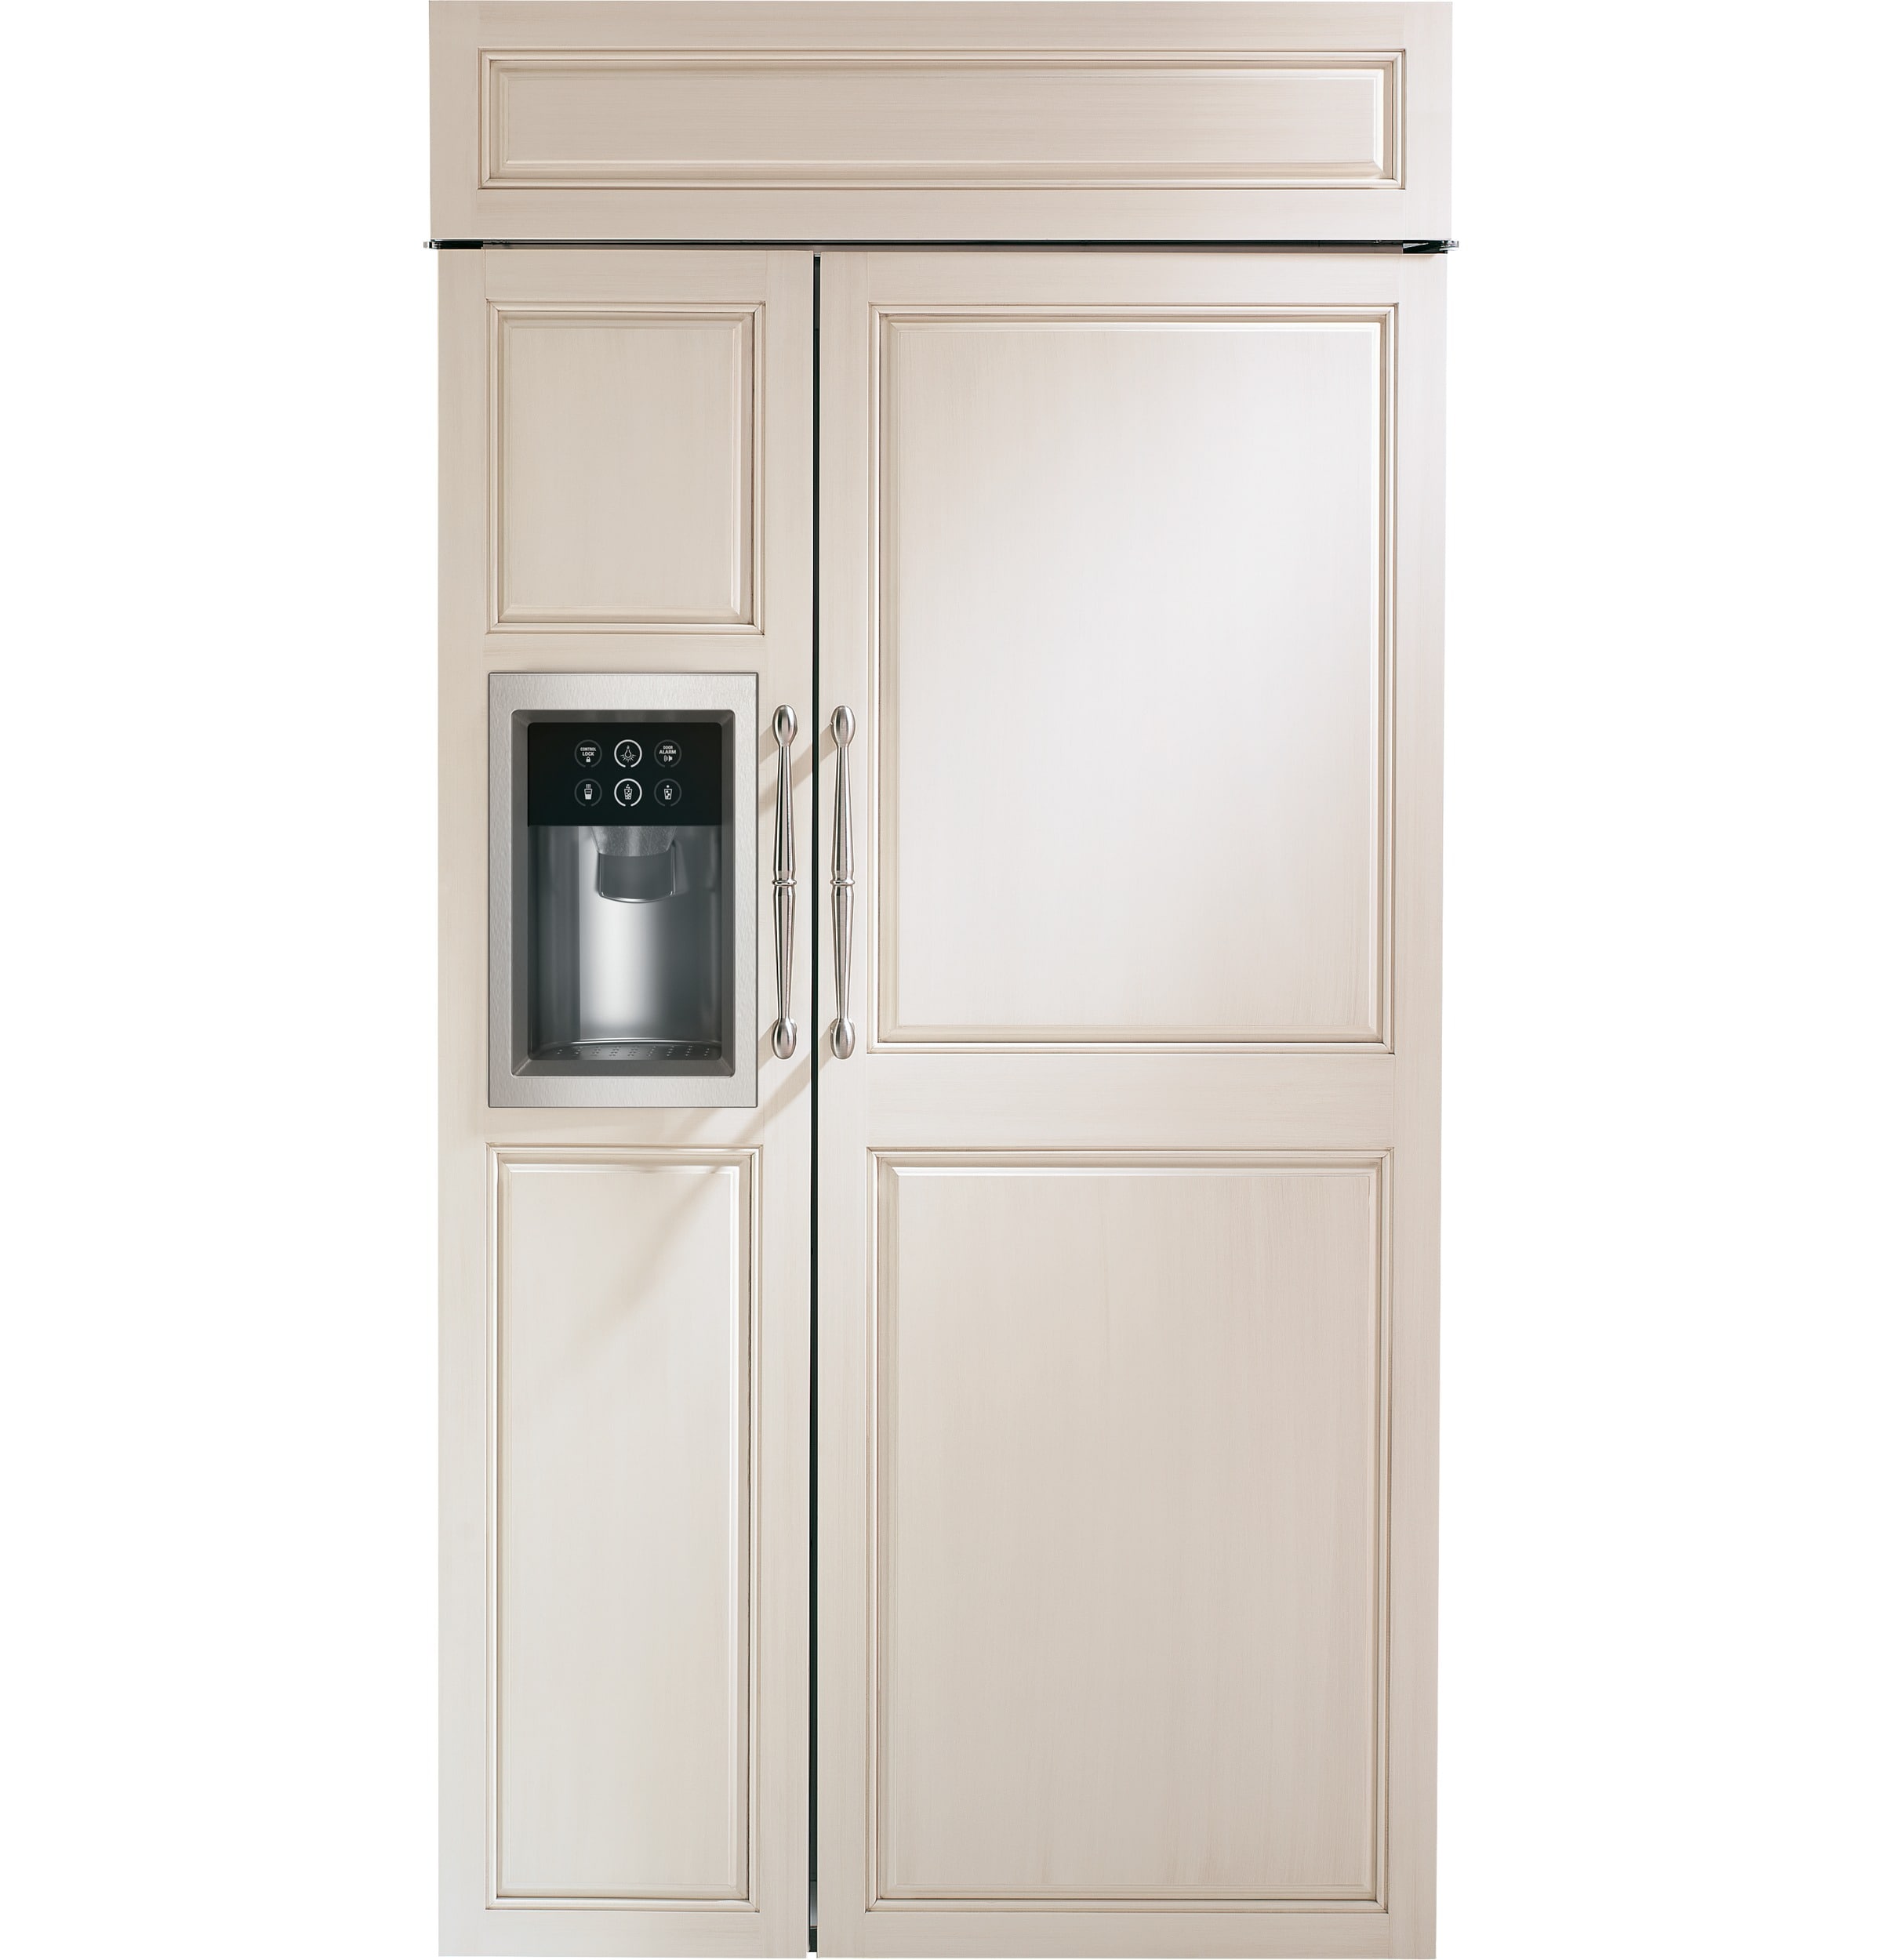 Monogram 24.61-cu ft Built-in Side-by-Side Refrigerator with Ice 